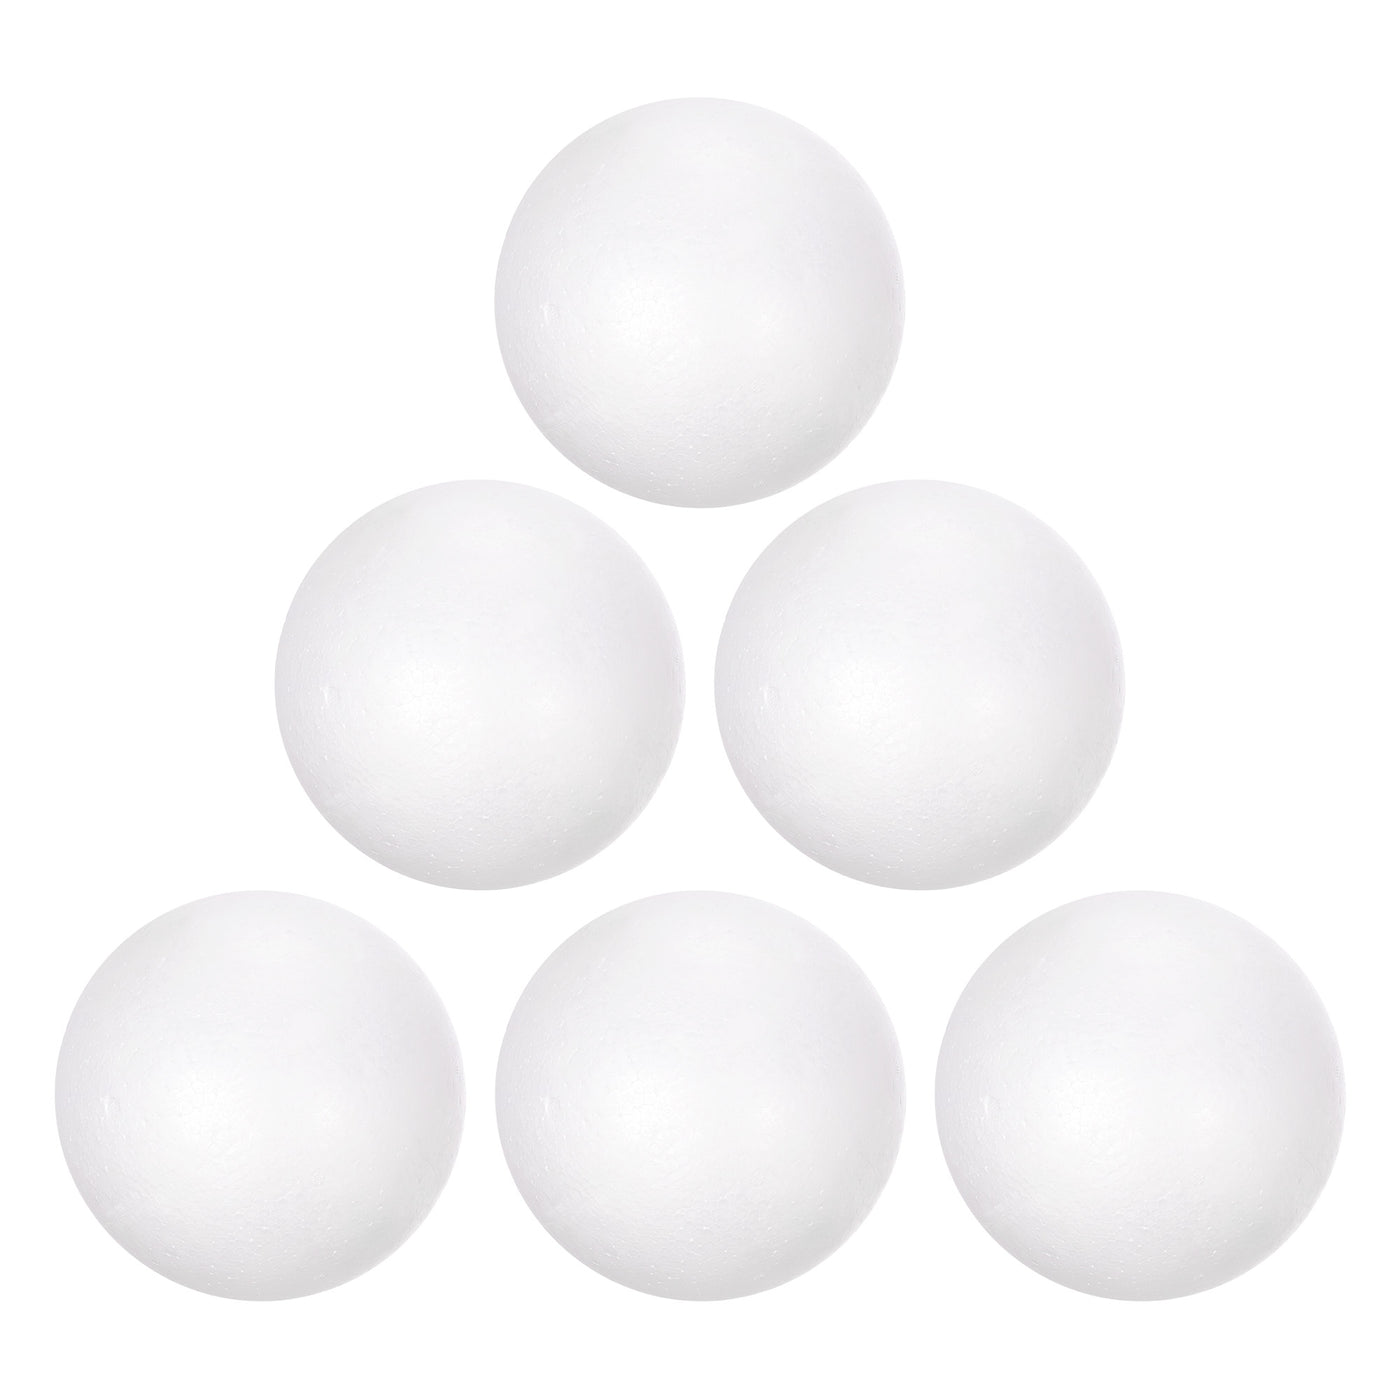 Uxcell Uxcell 6Pcs 3" White Polystyrene Foam Solid Balls for Crafts and Party Decorations